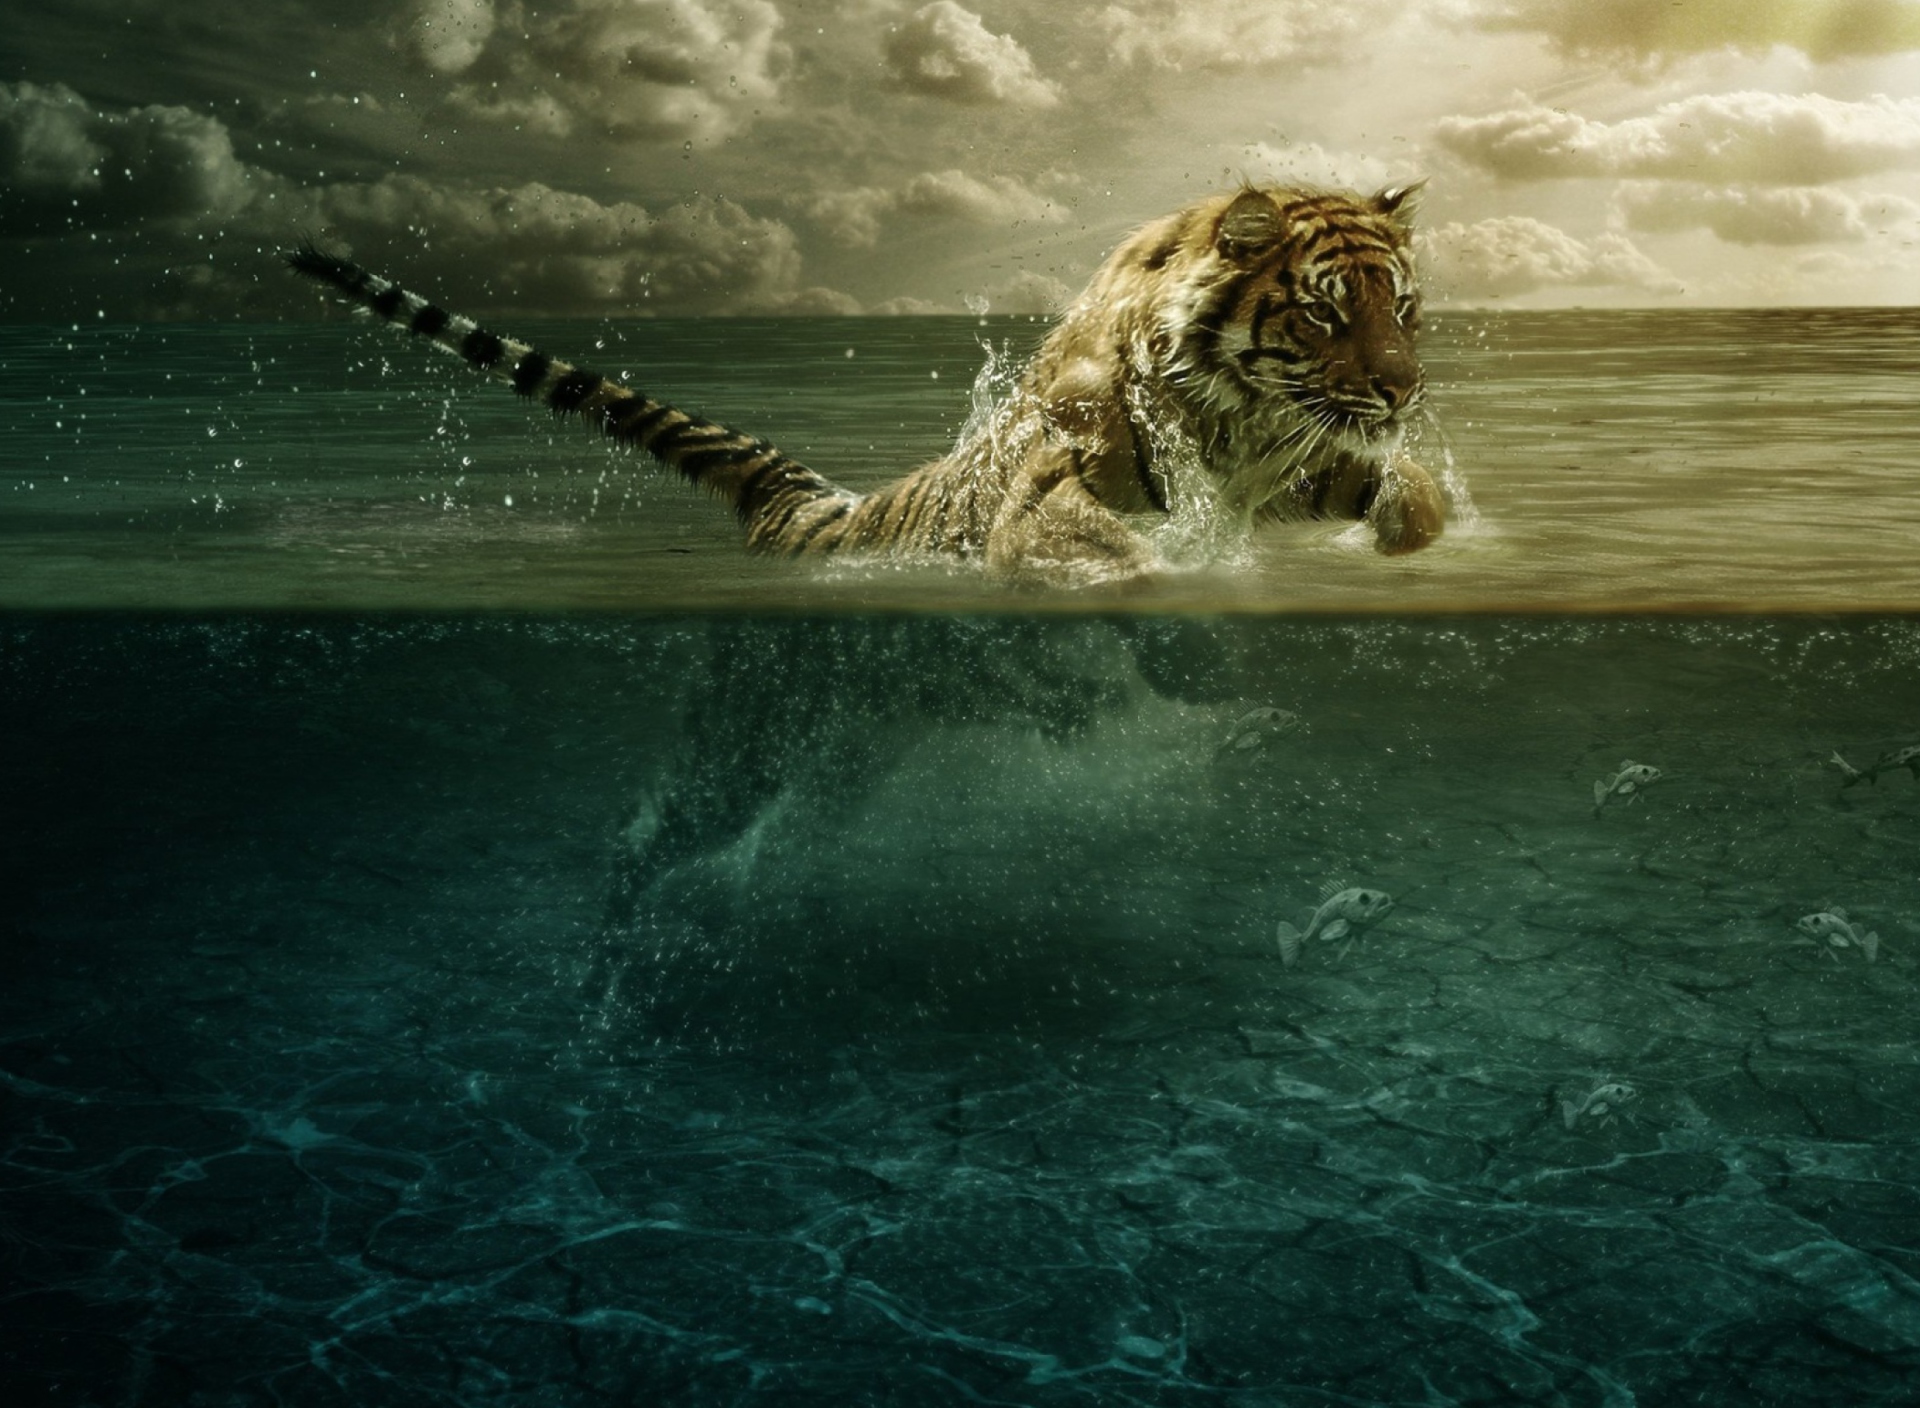 Tiger Jumping In Water wallpaper 1920x1408